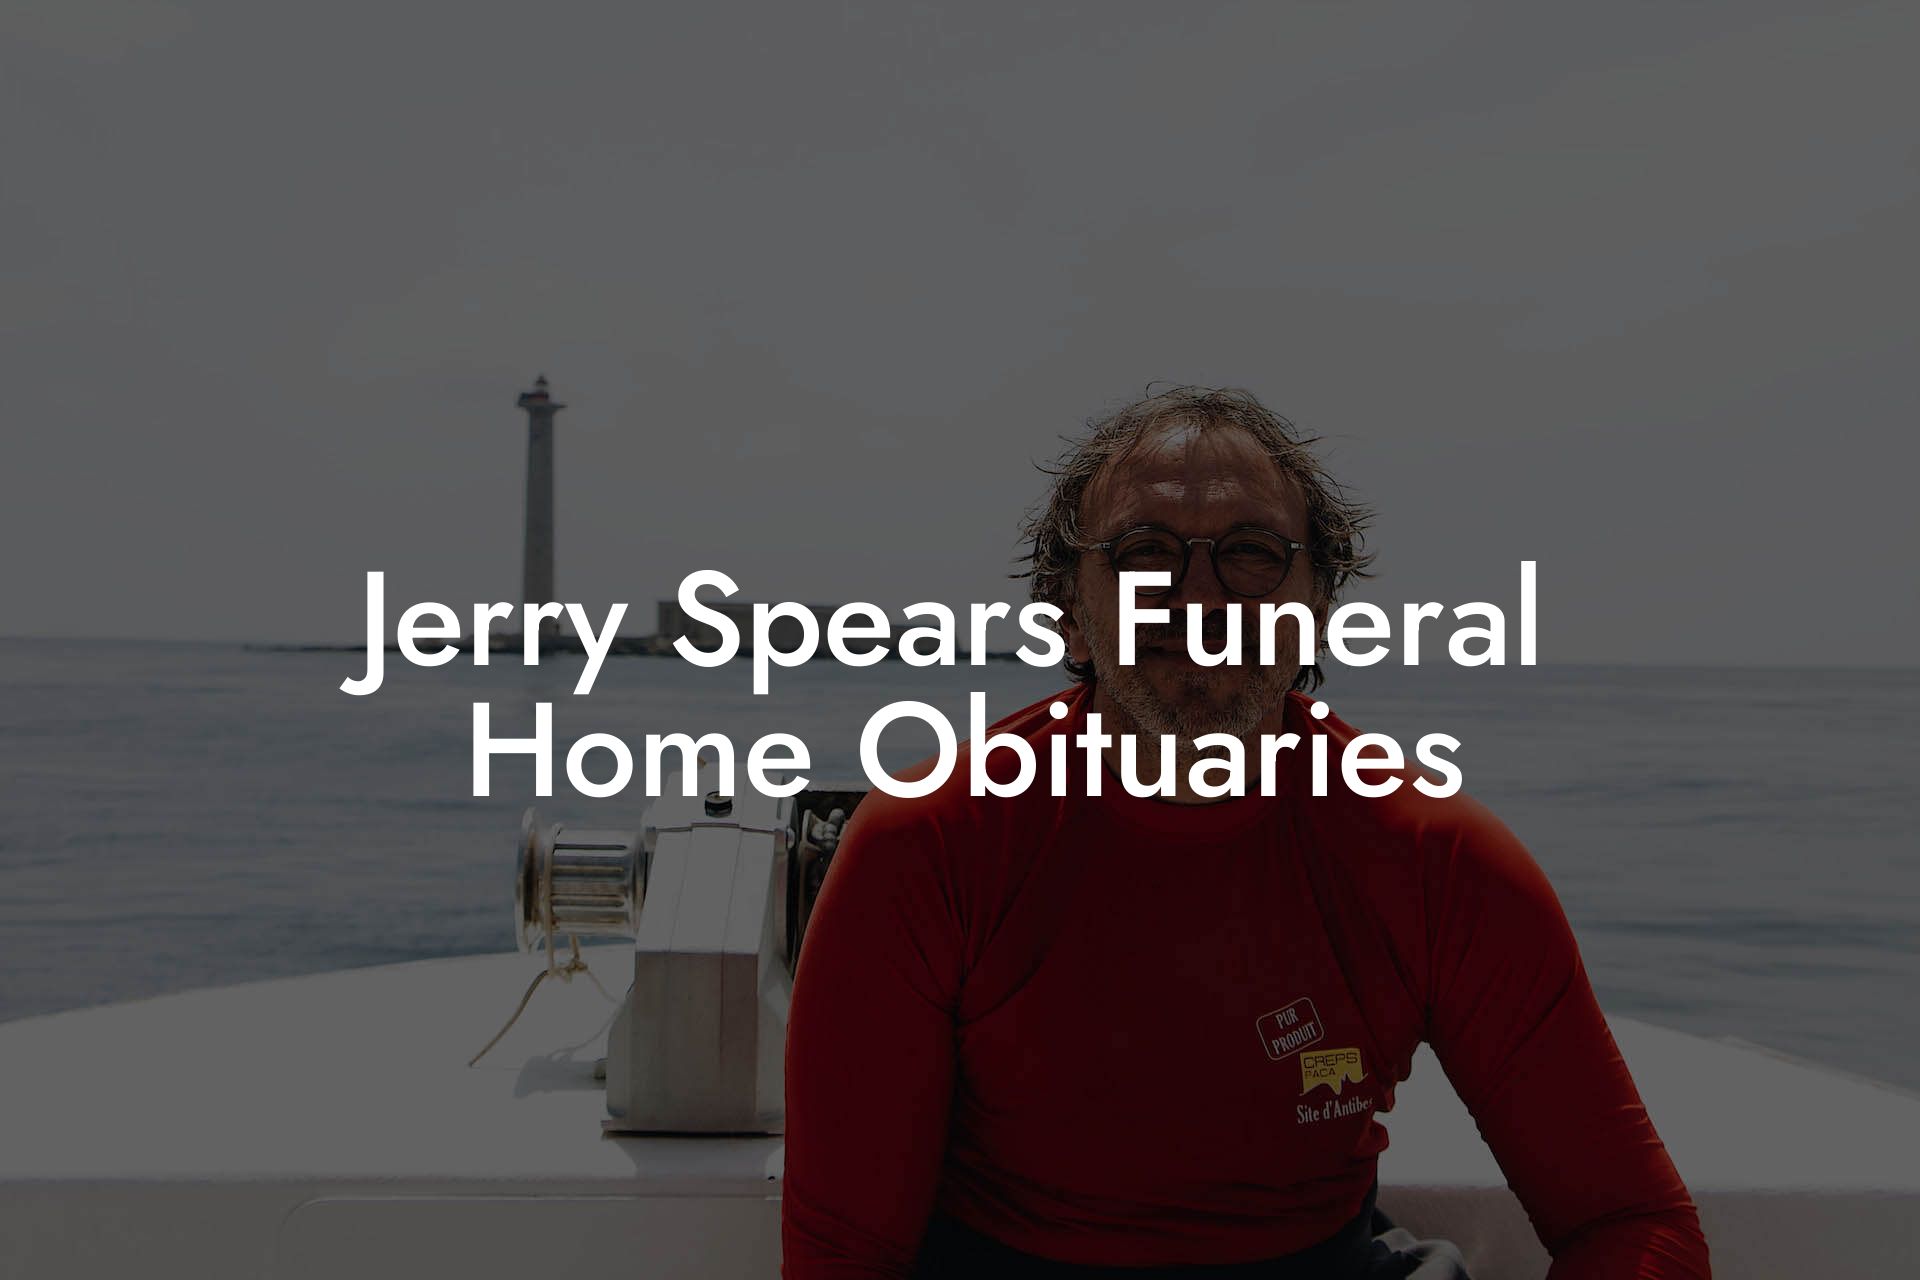 Jerry Spears Funeral Home Obituaries